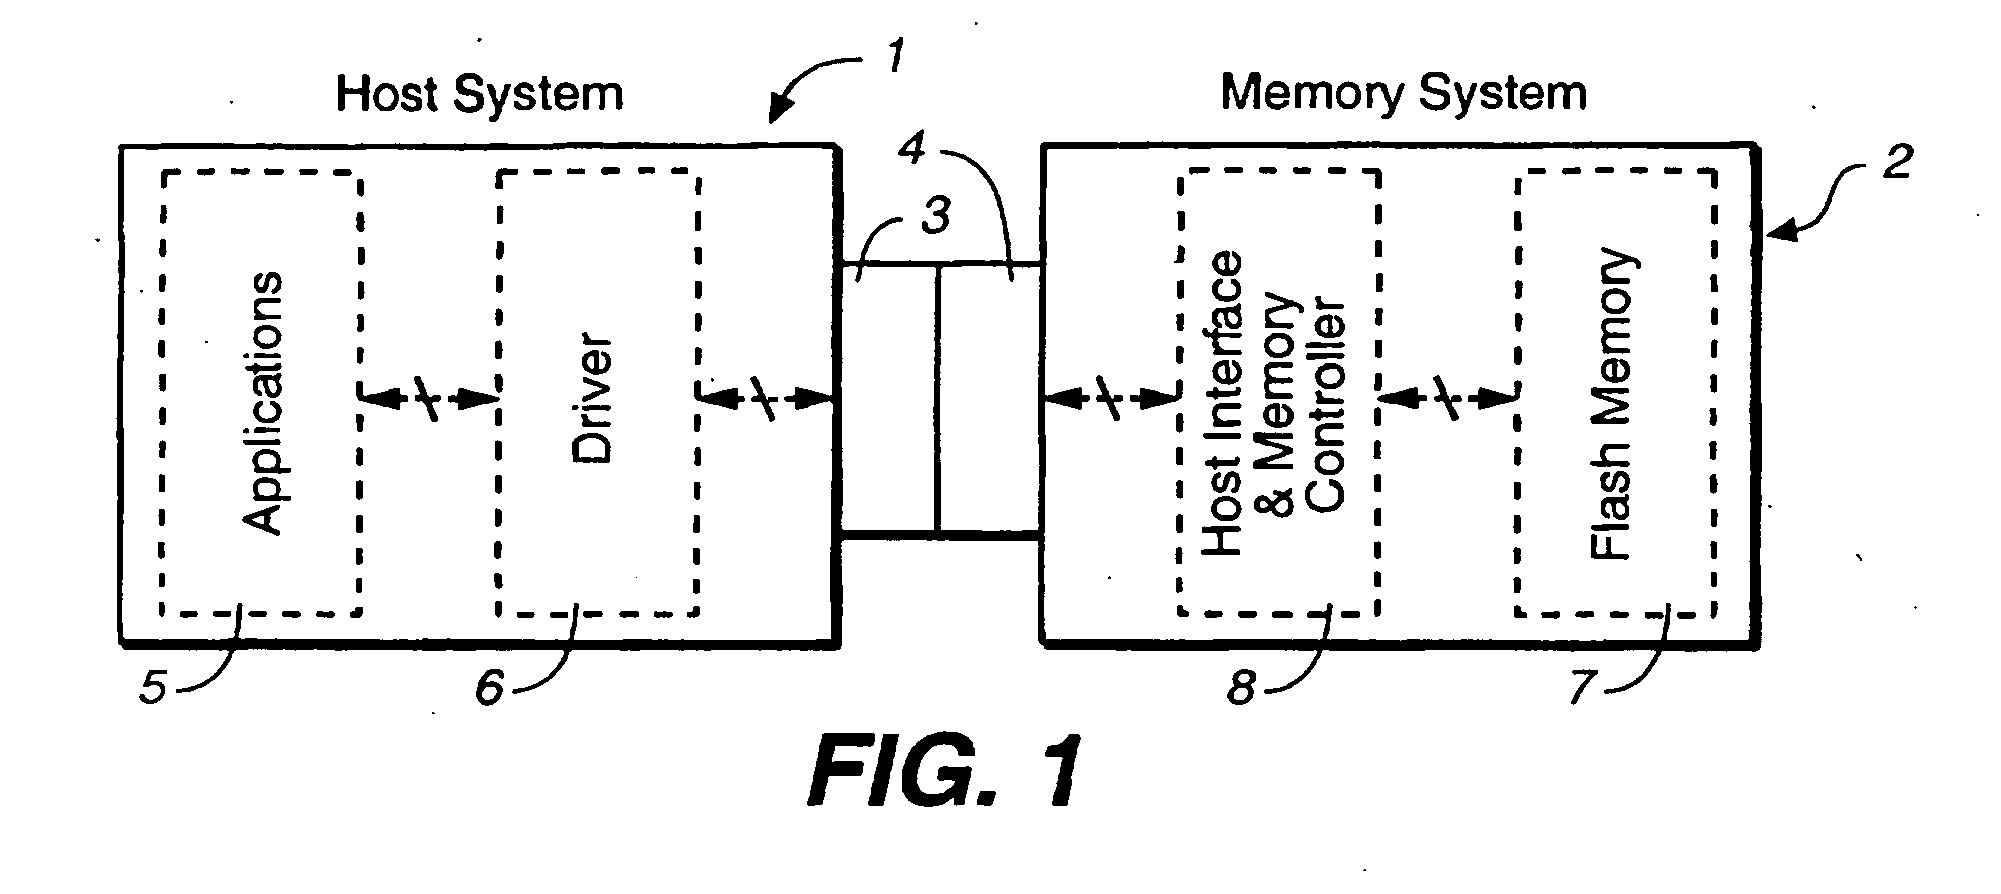 Methods for memory allocation in non-volatile memories with a directly mapped file storage system